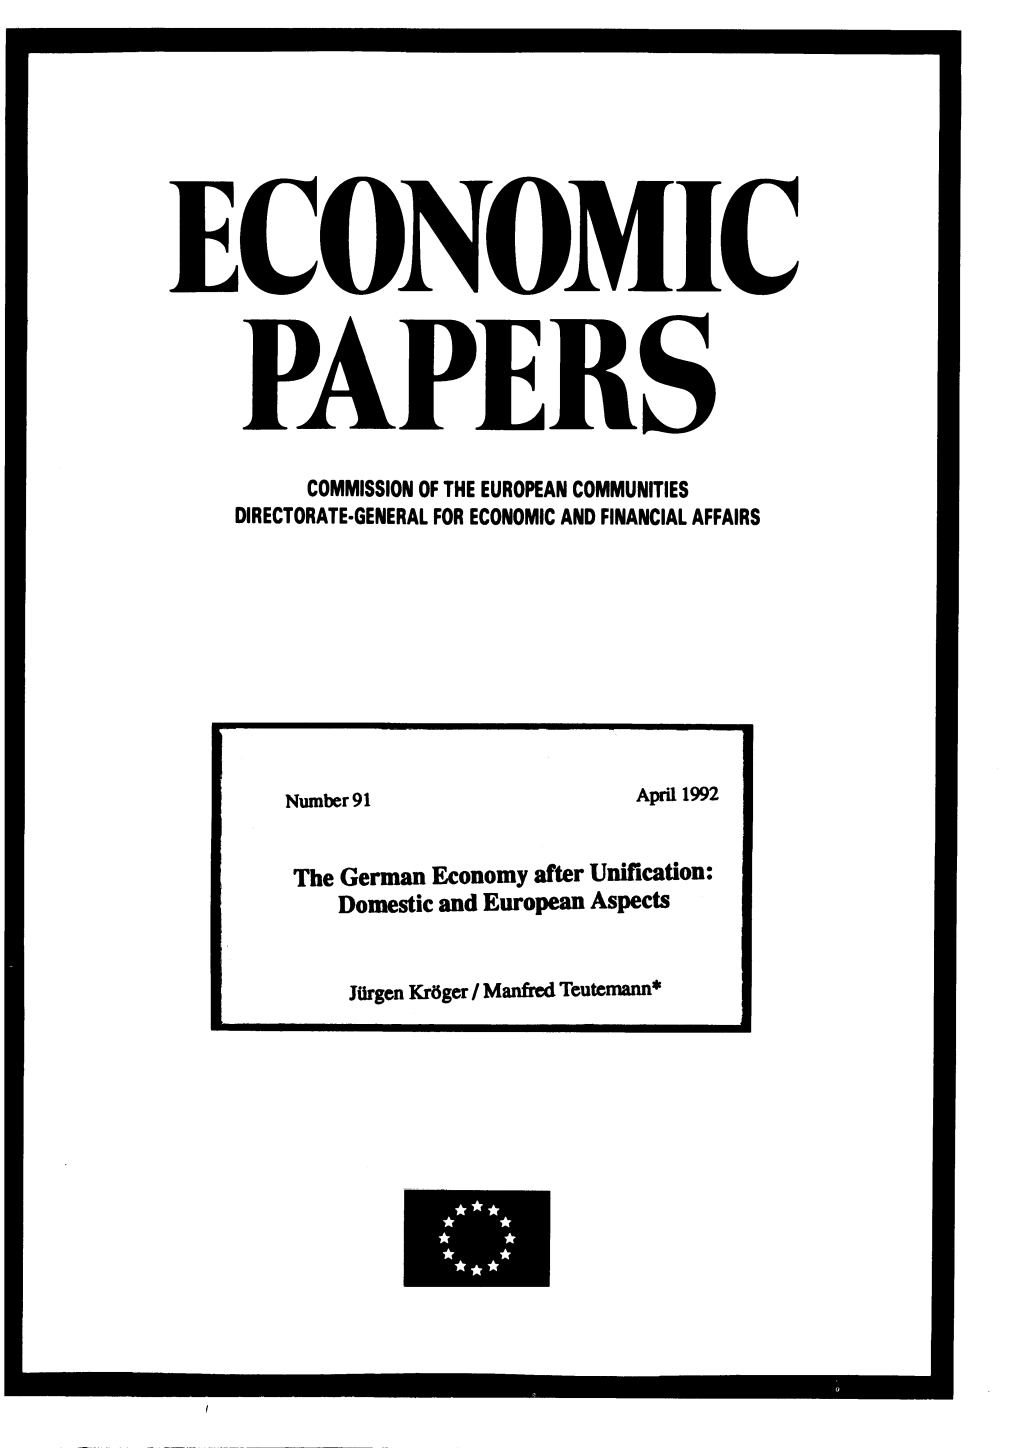 The German Economy After Unification: Domestic and European Aspects